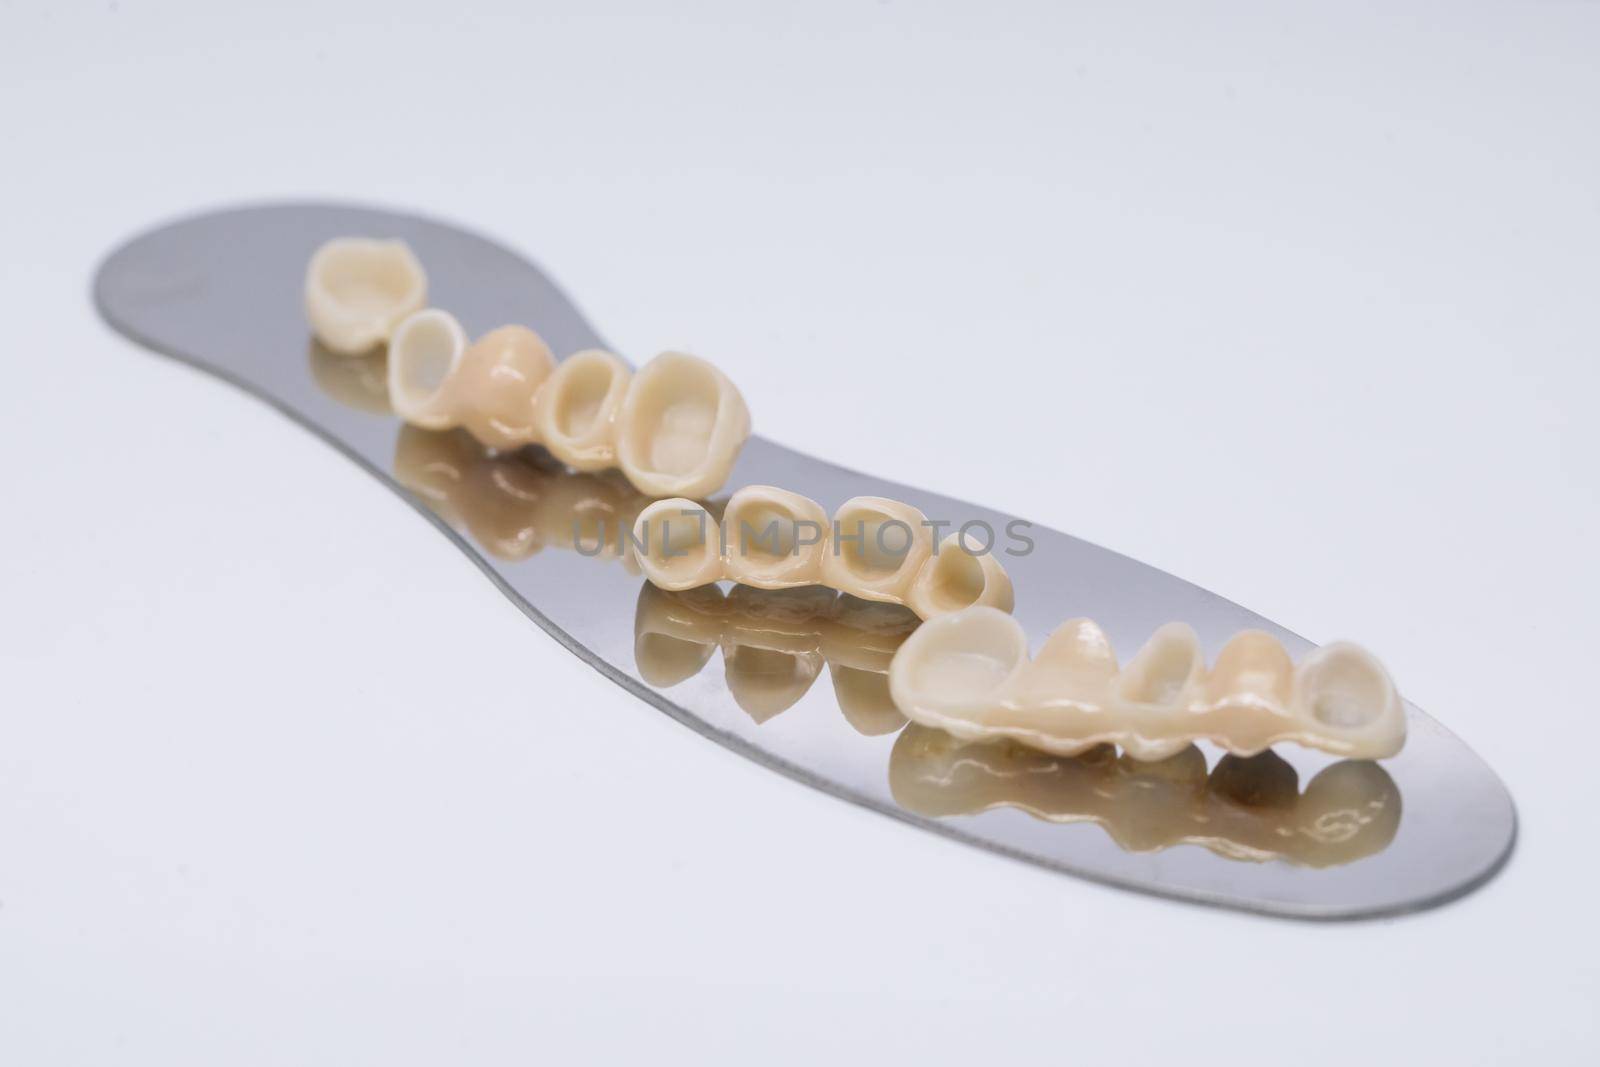 Metal free ceramic dental crowns. Zirconium tooth crown Isolate on wite background. Aesthetic restoration of tooth loss.